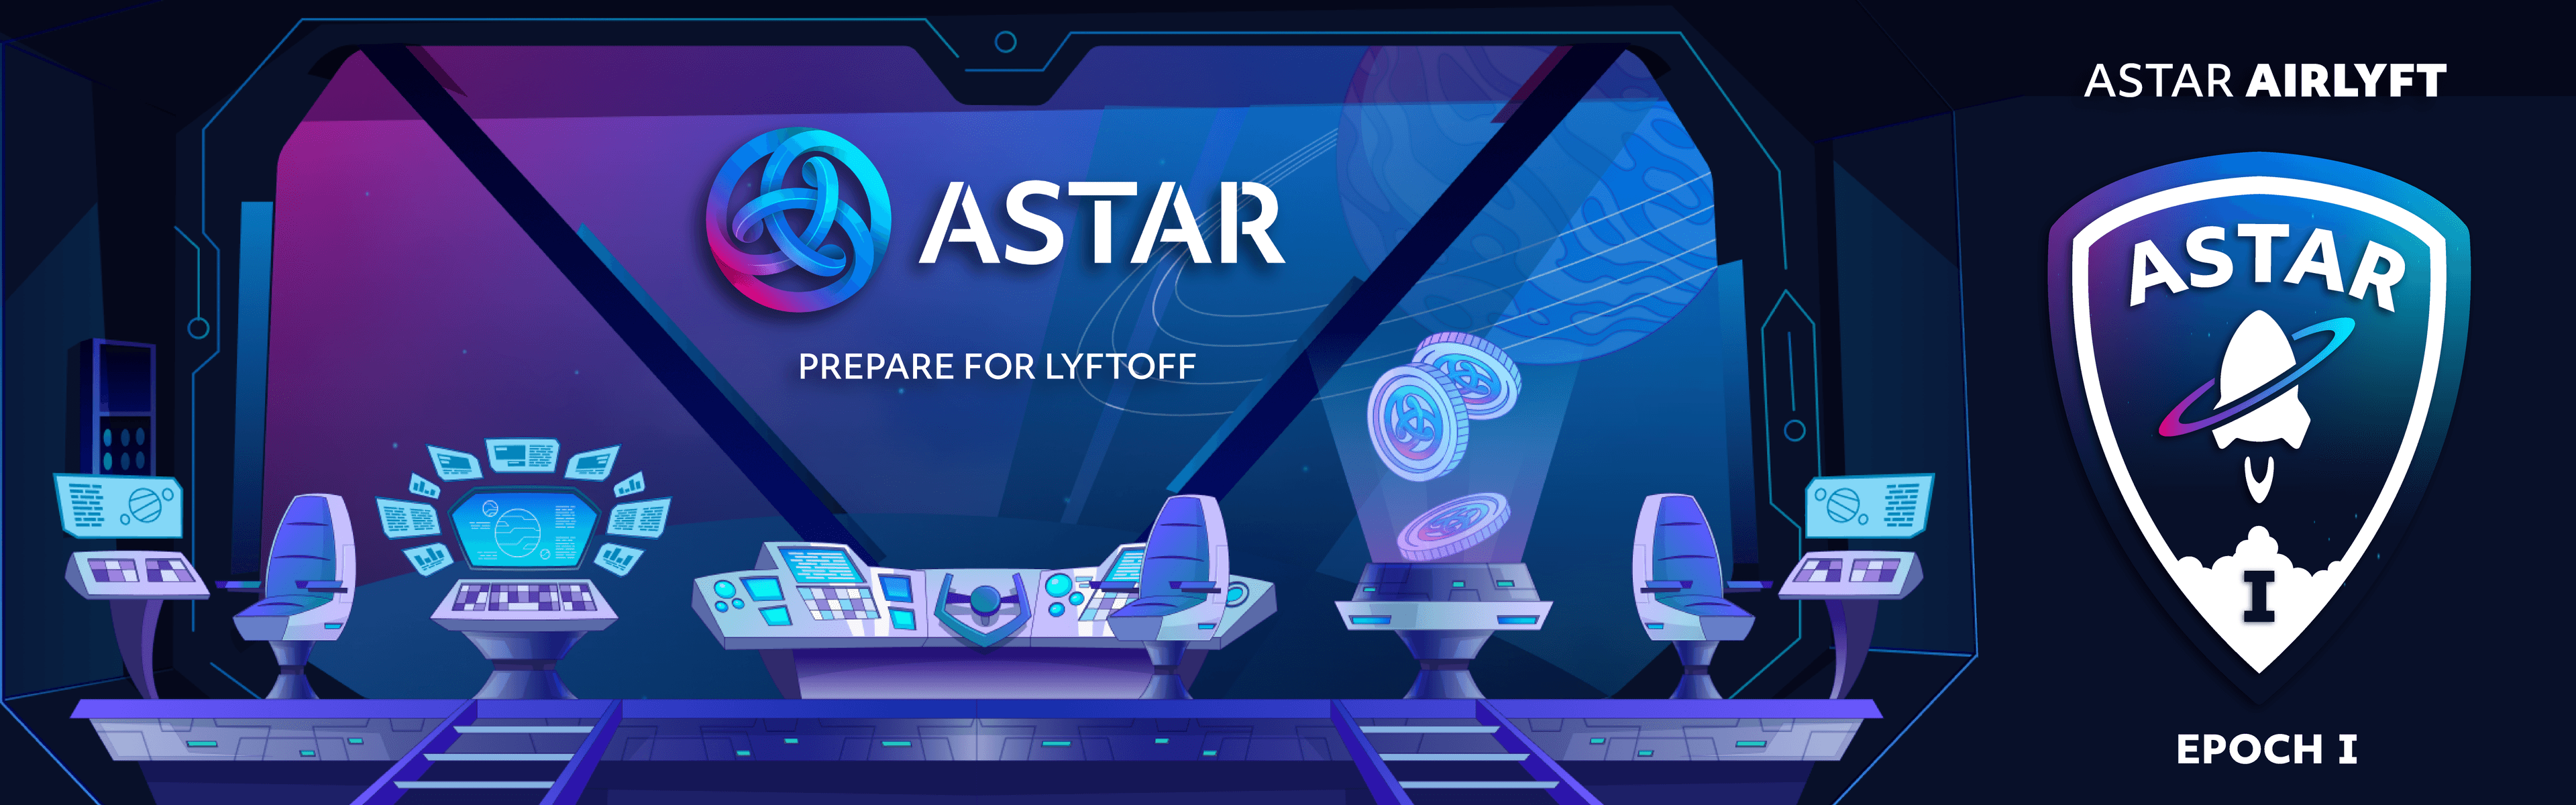 Astar Network_cover-image